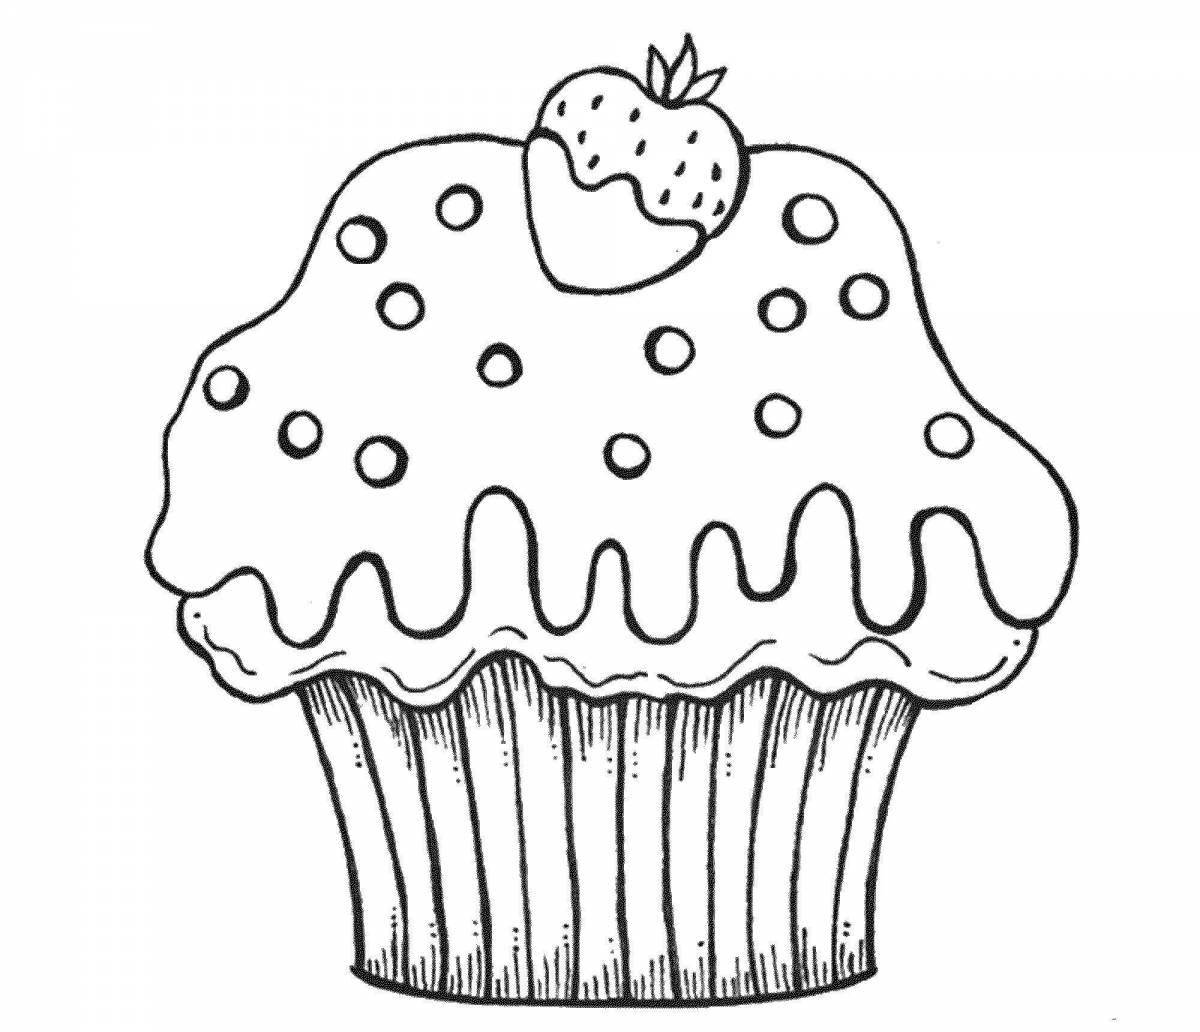 Colorful cake coloring page